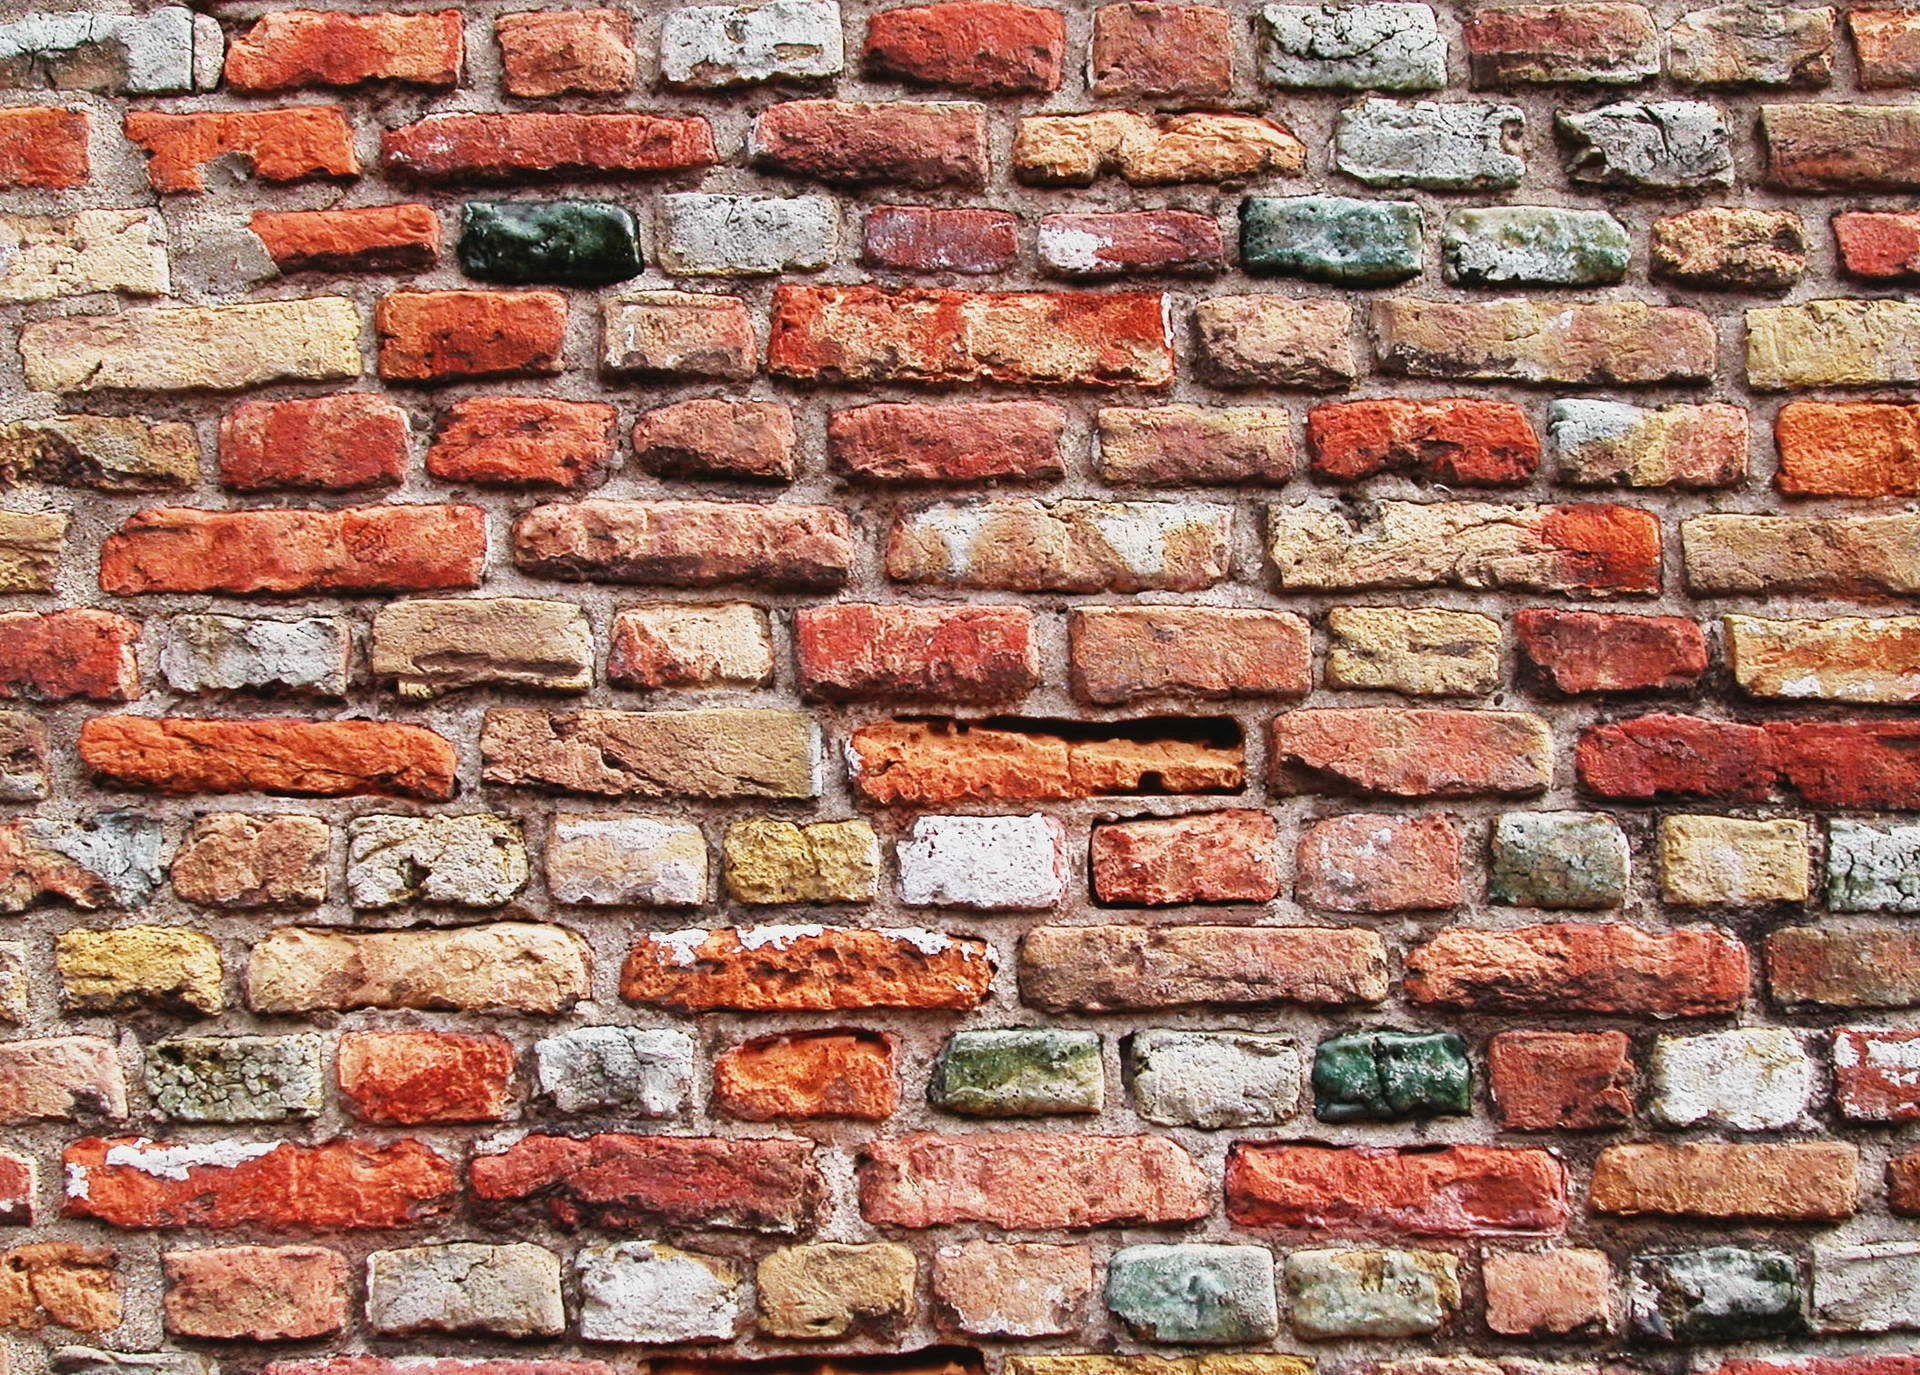 photography of red, white, and orange wall bricks